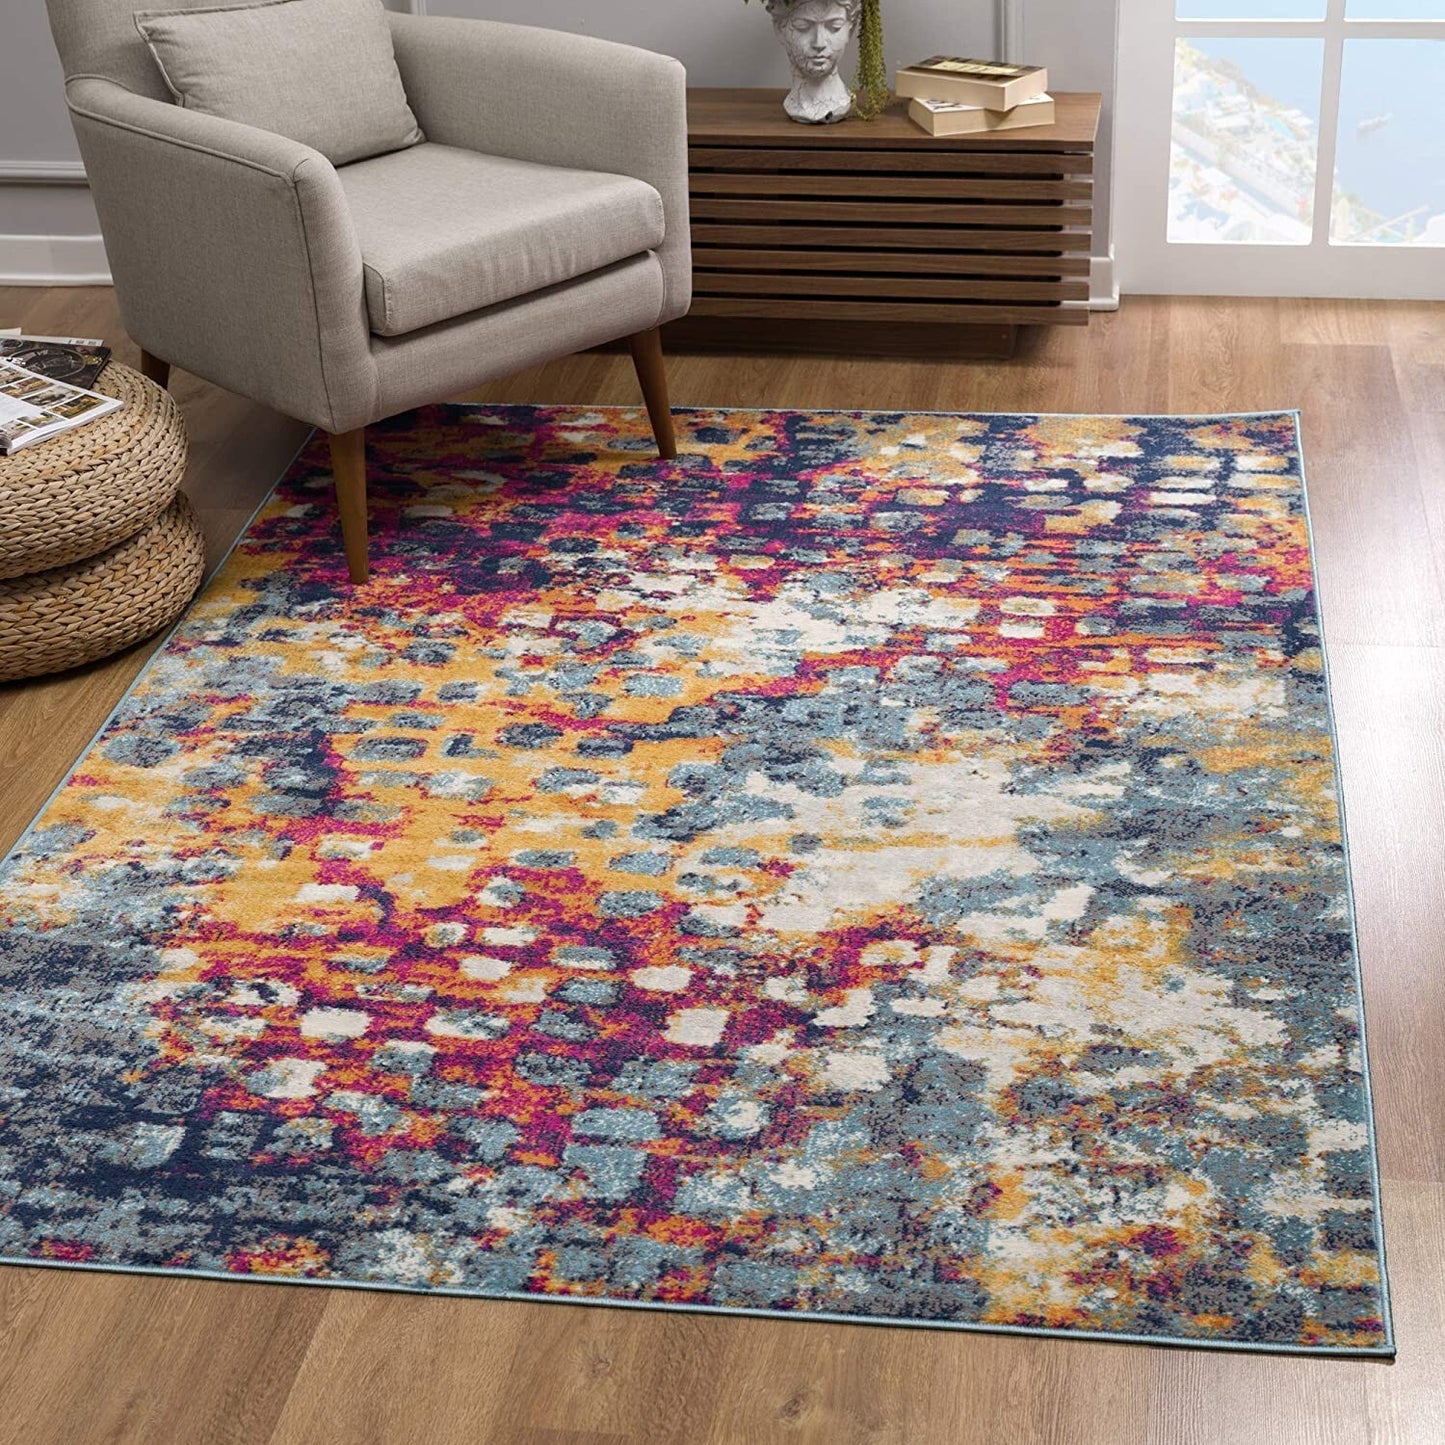 2' x 15' Multicolored Abstract Painting Runner Rug